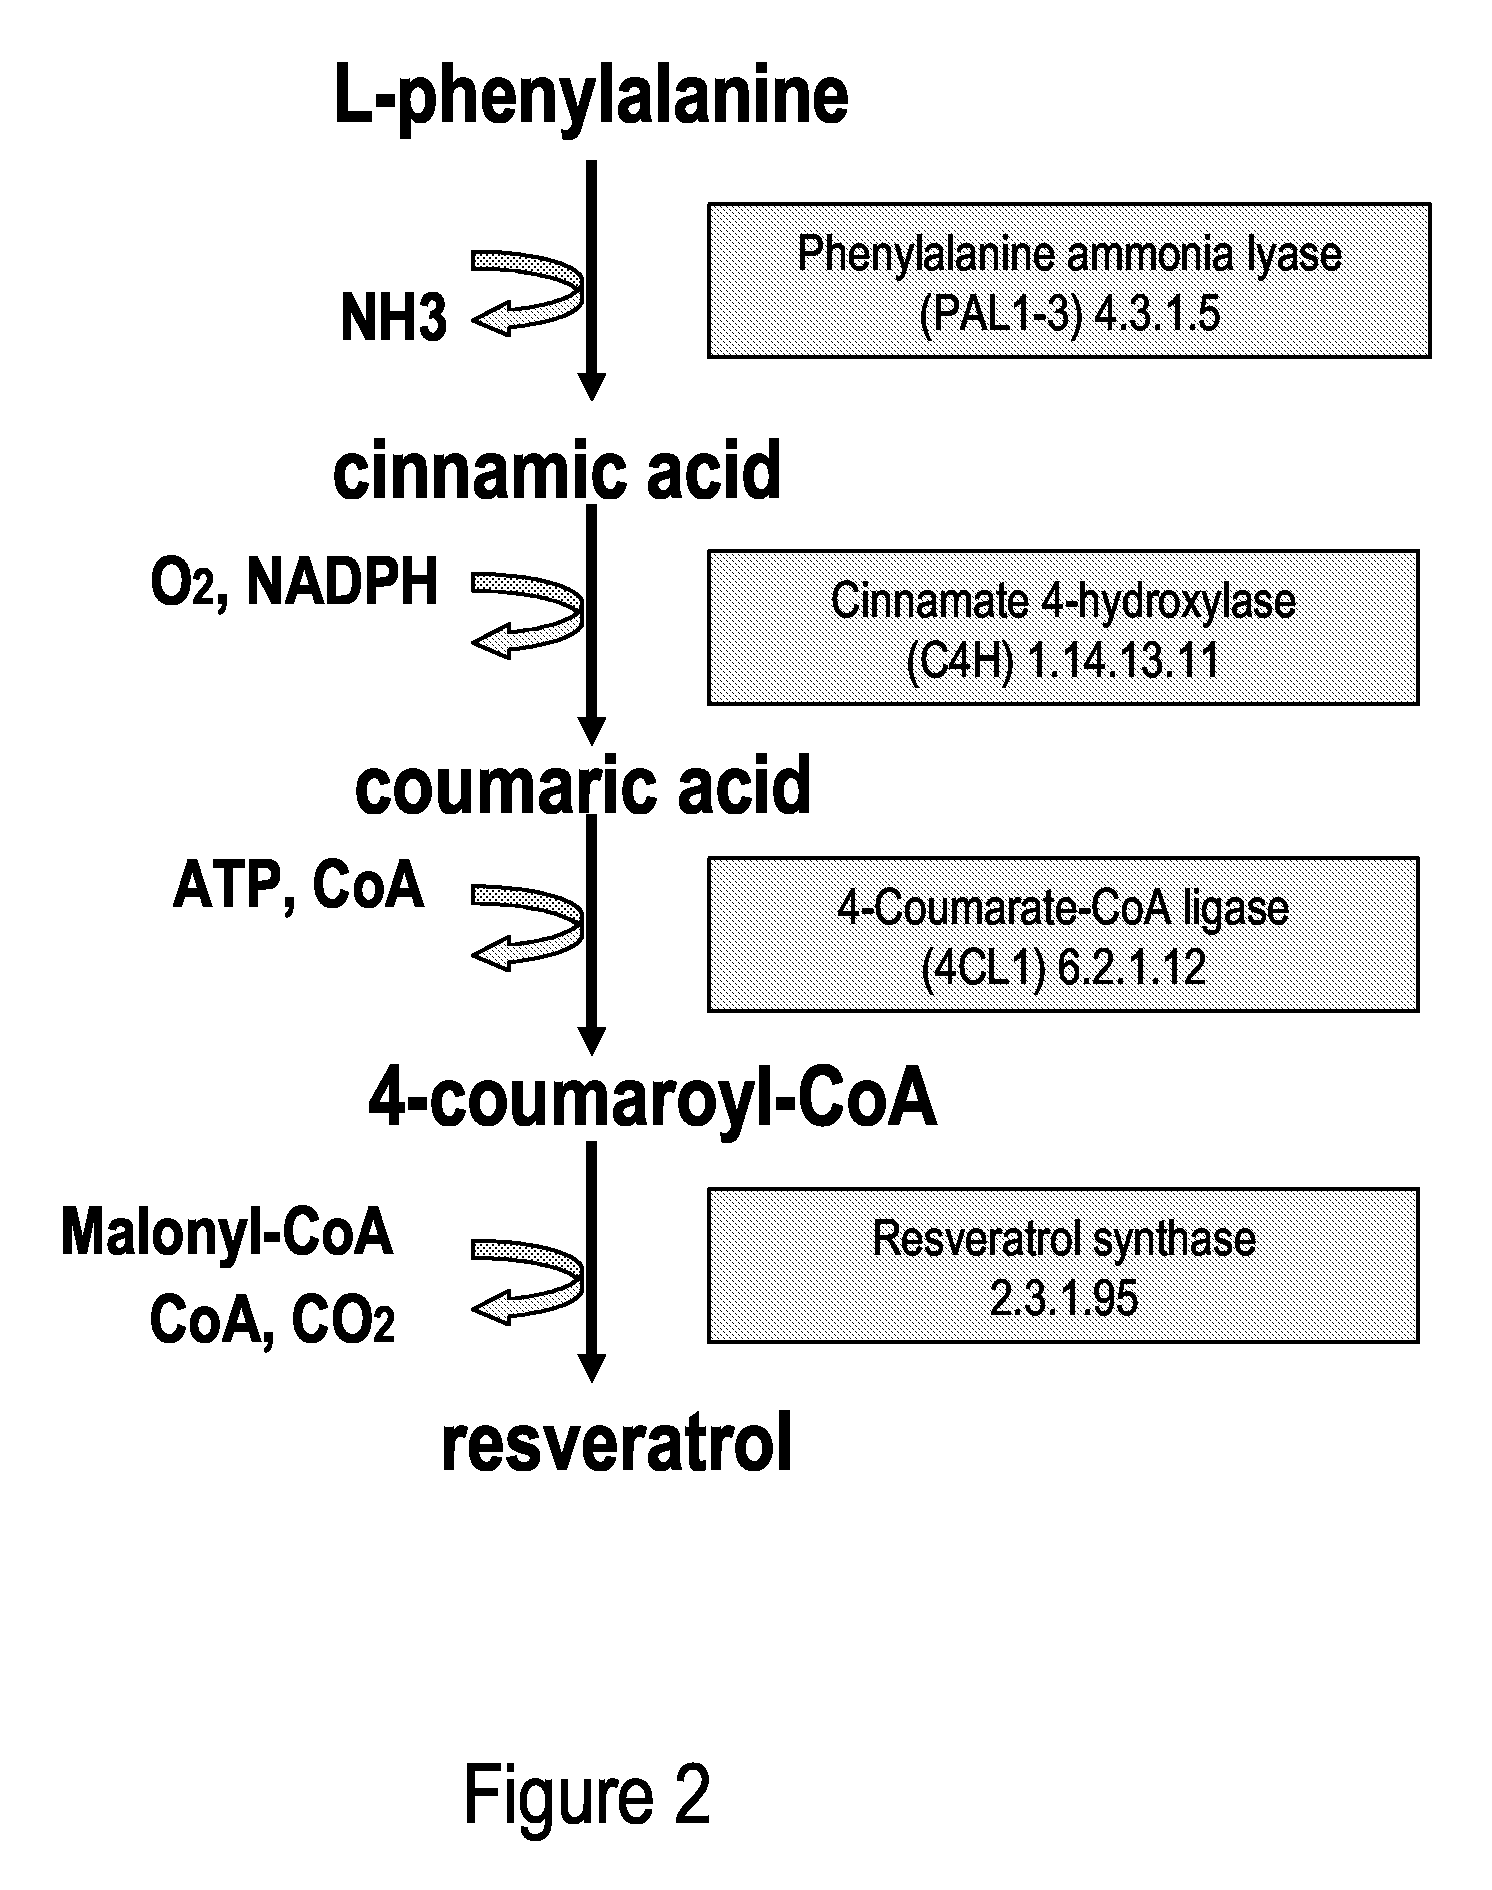 Metabolically engineered cells for the production of resveratrol or an oligomeric or glycosidically-bound derivative thereof